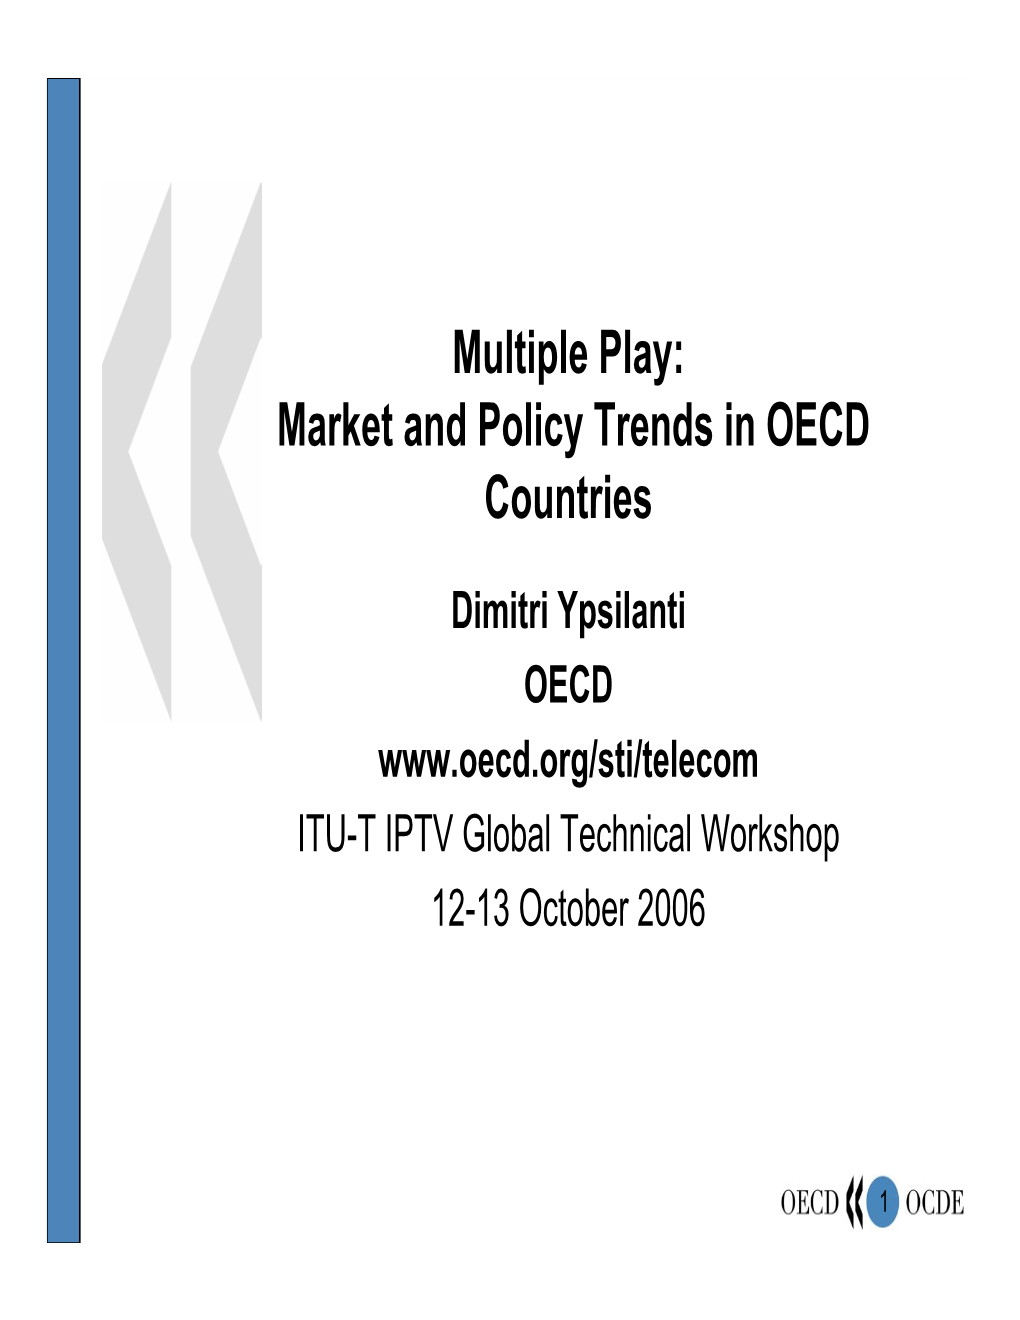 Market and Policy Trends in OECD Countries